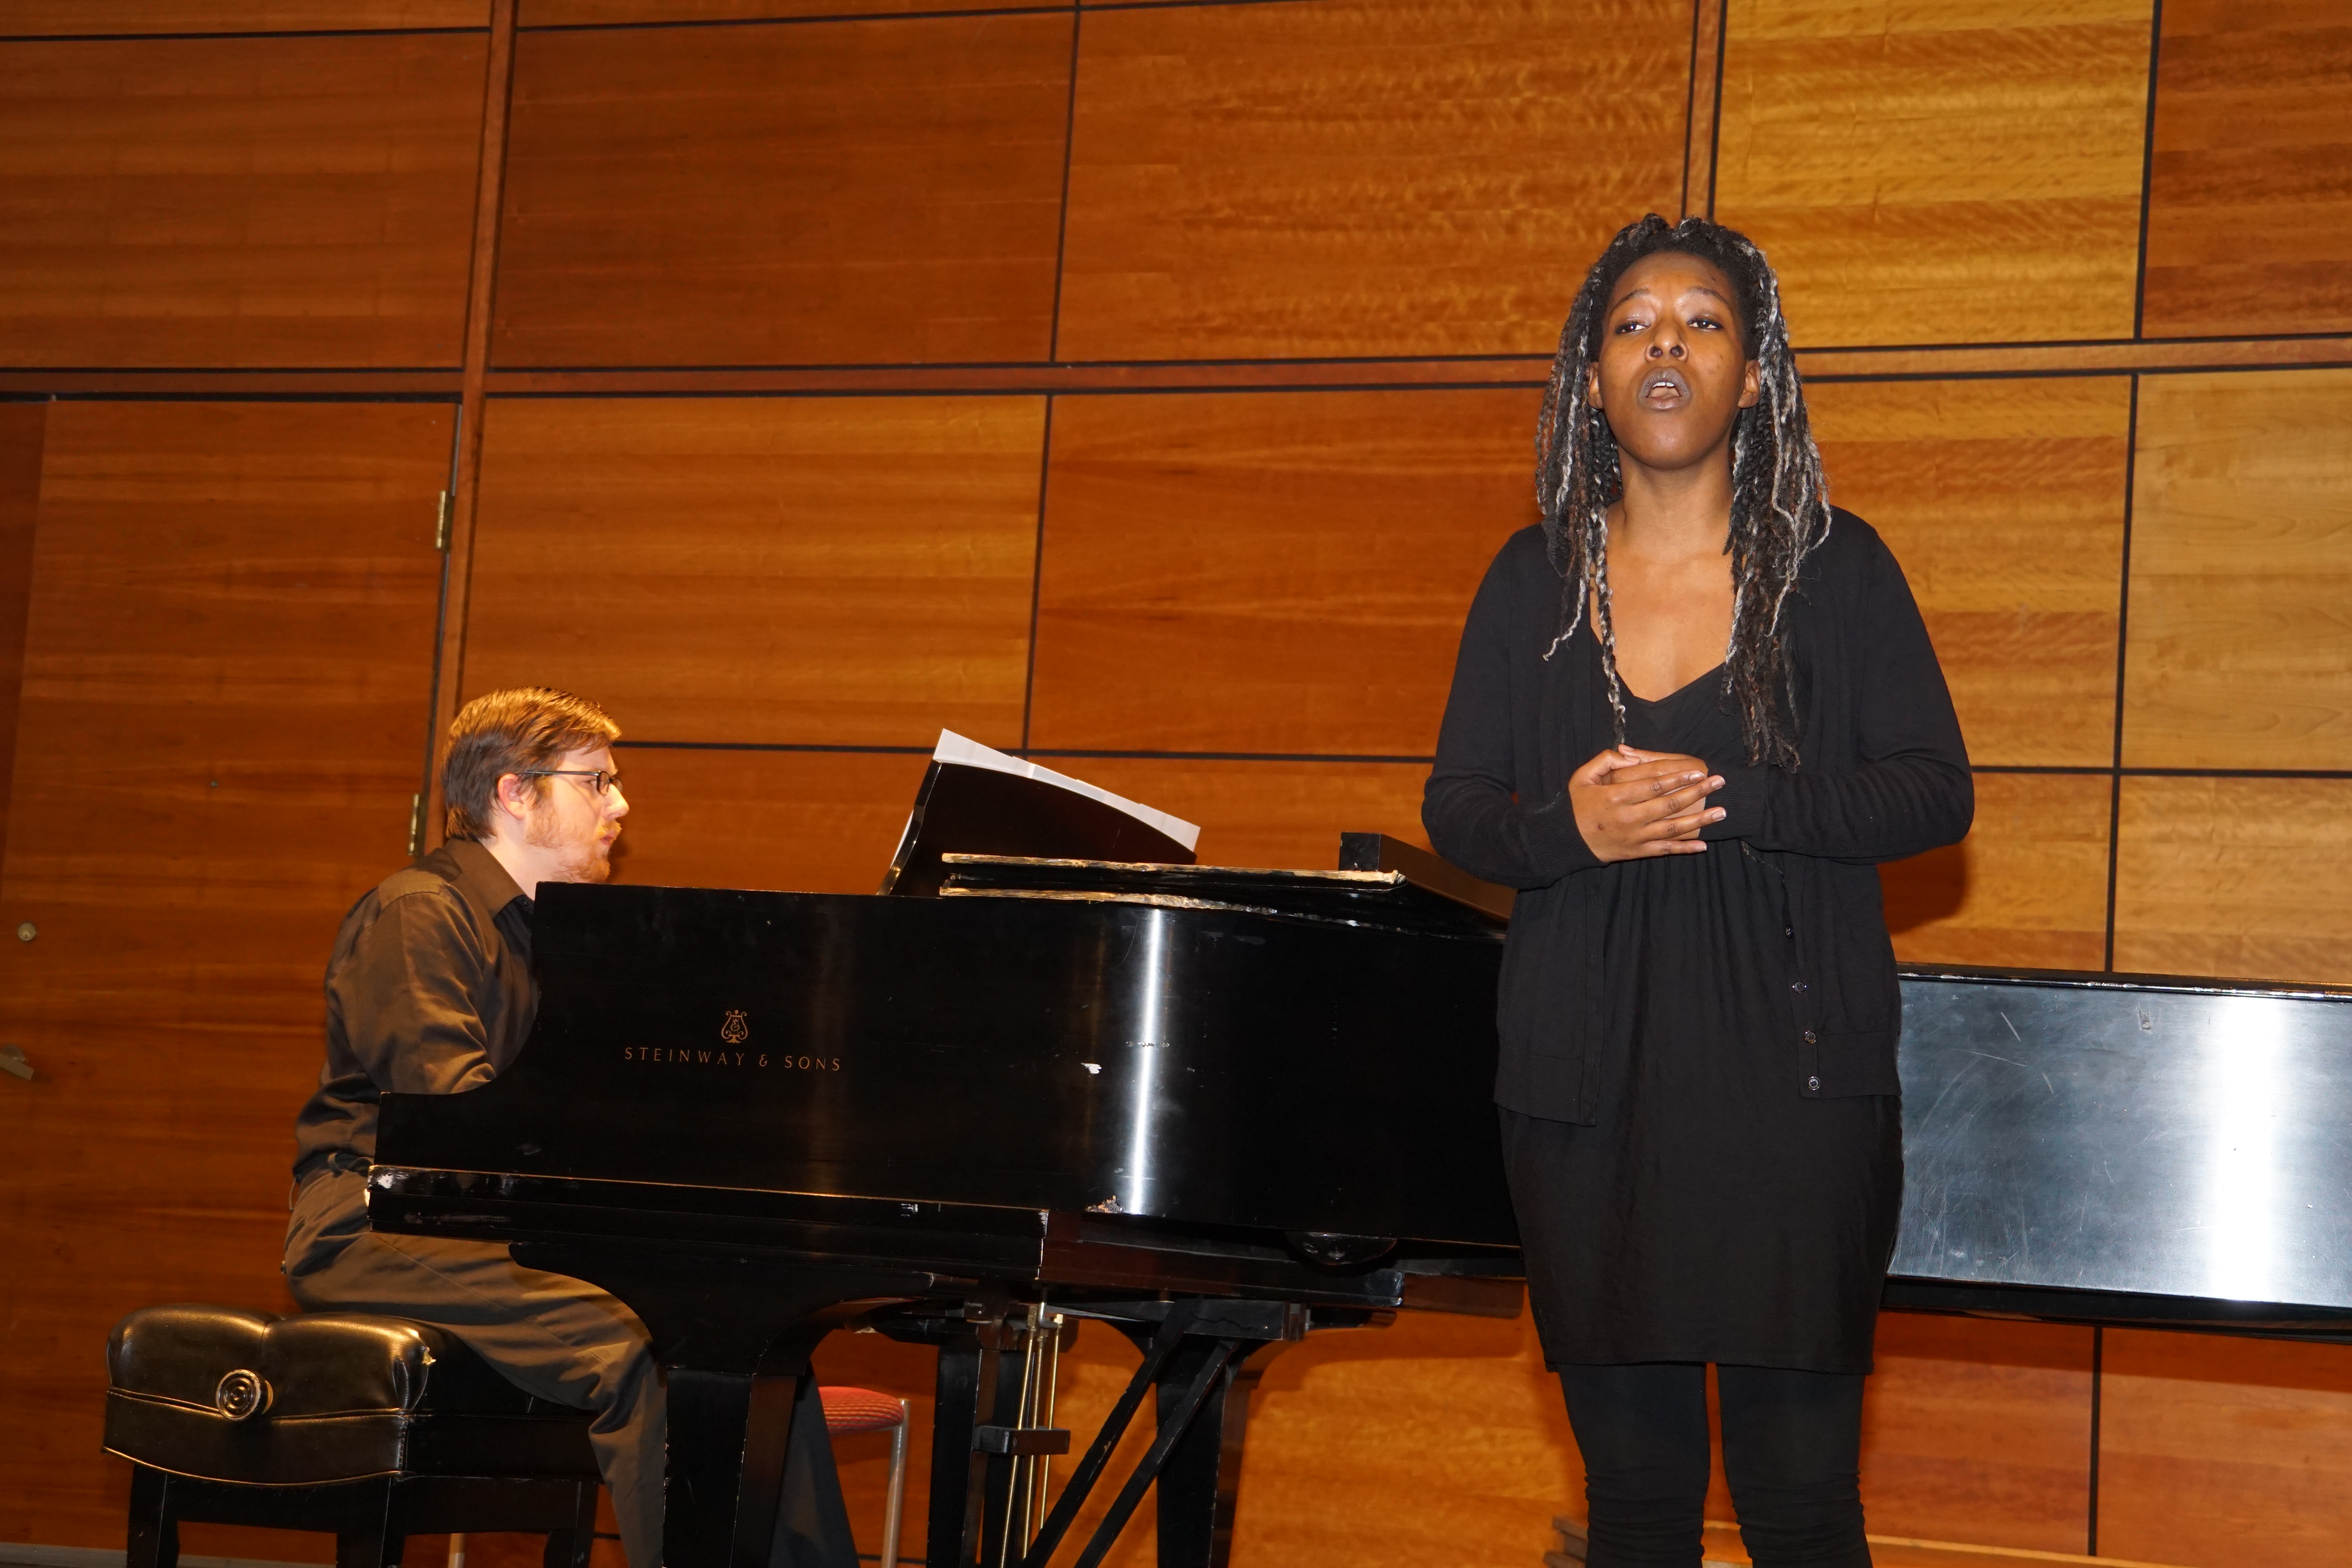 A student singing vocals with an instructor playing piano in the background